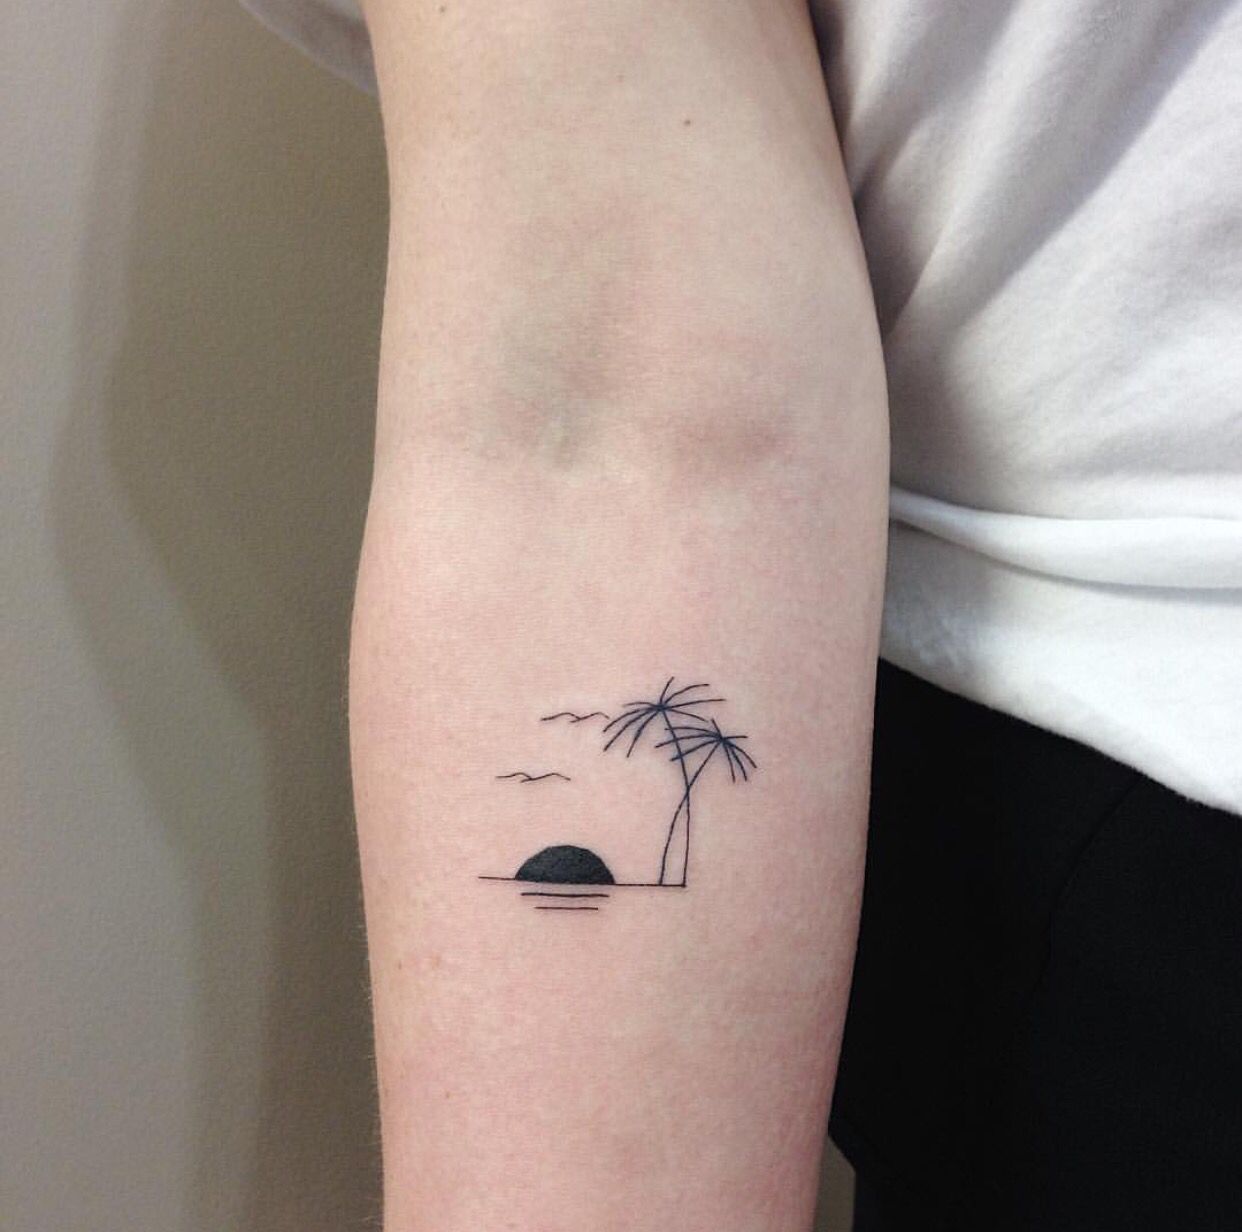 Meaningful Tattoos Designs